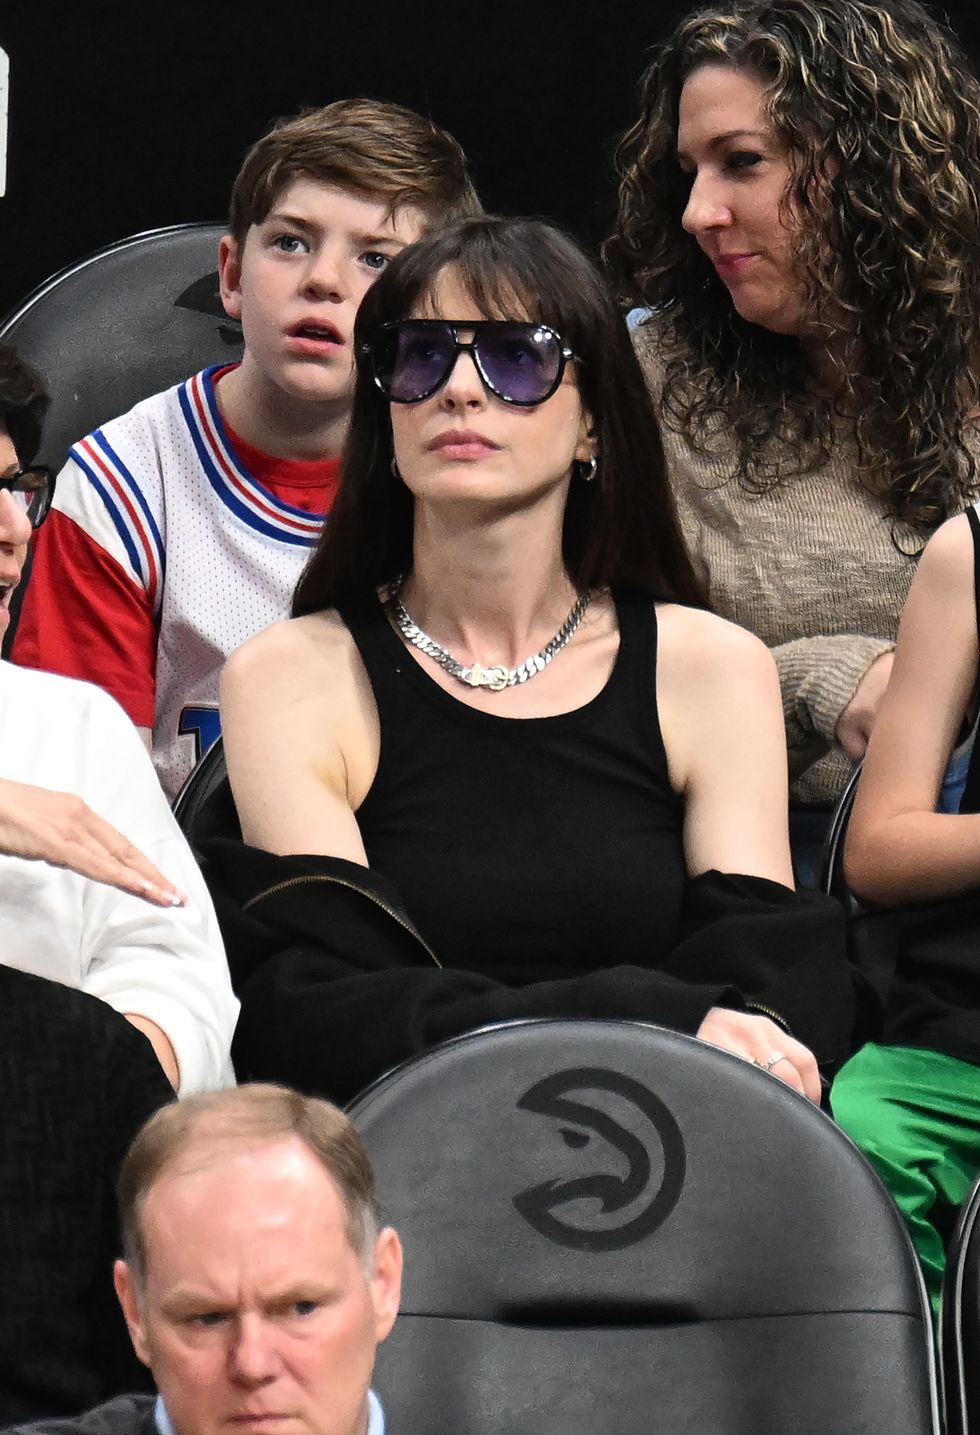 Anne Hathaway Nails Courtside Style in an Edgy All-Black Outfit